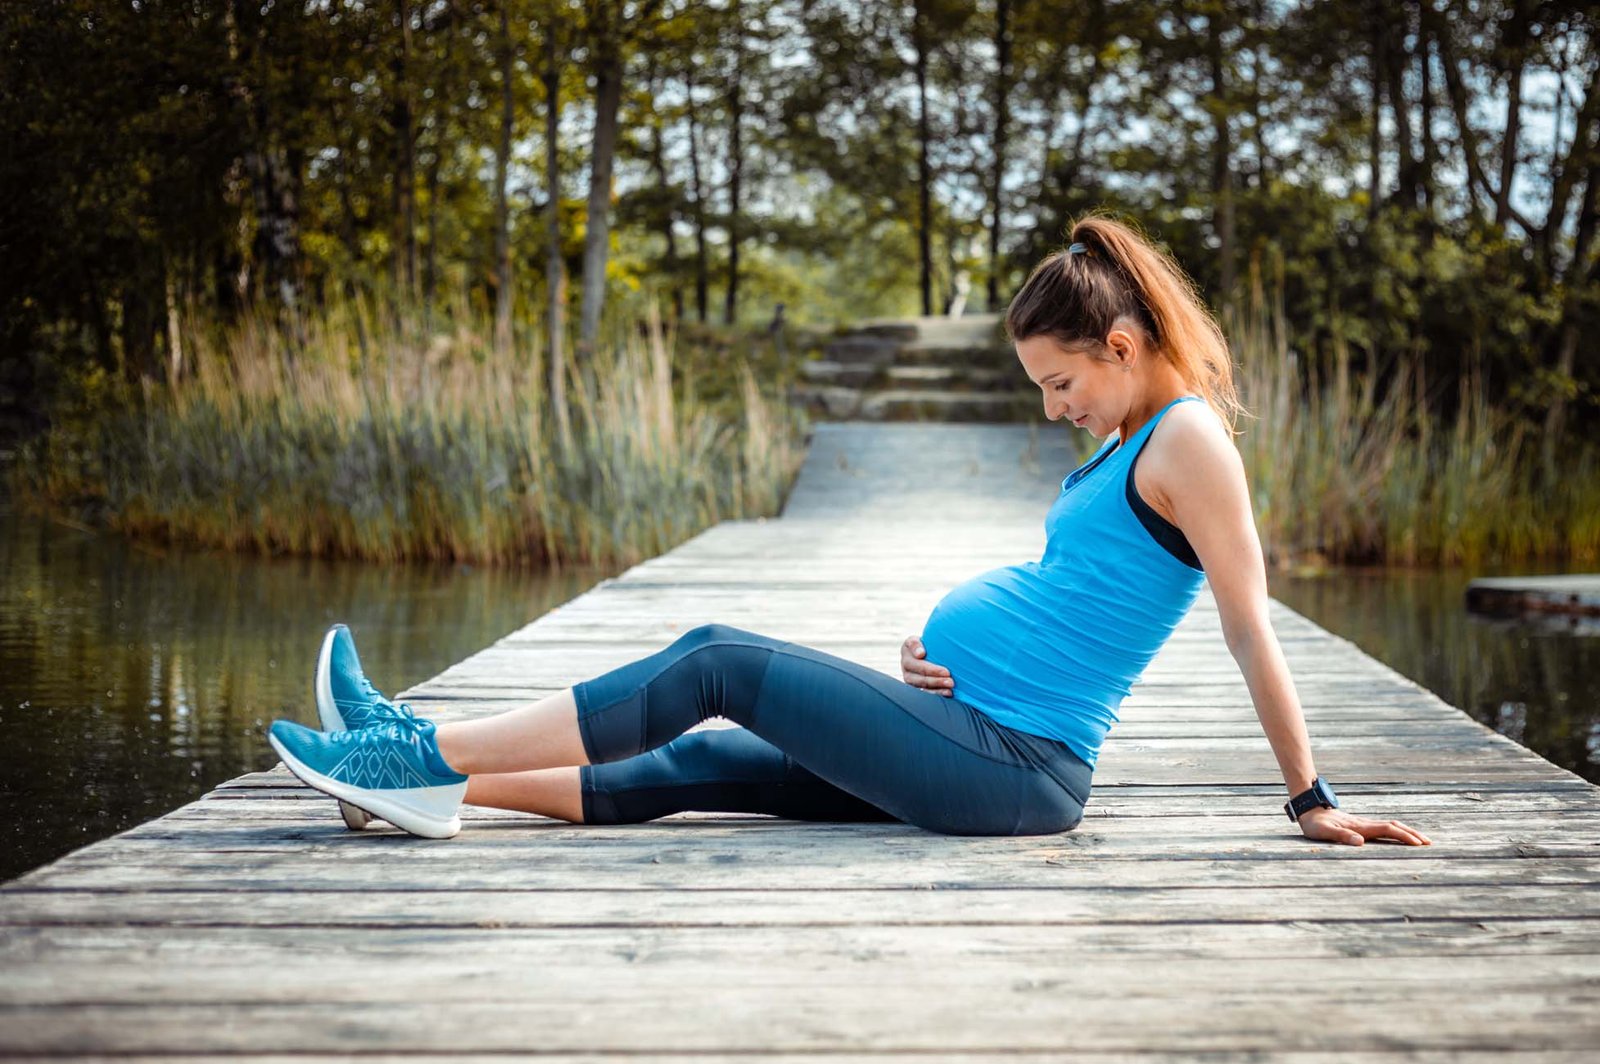 Pregnant woman exercising outdoor and resting